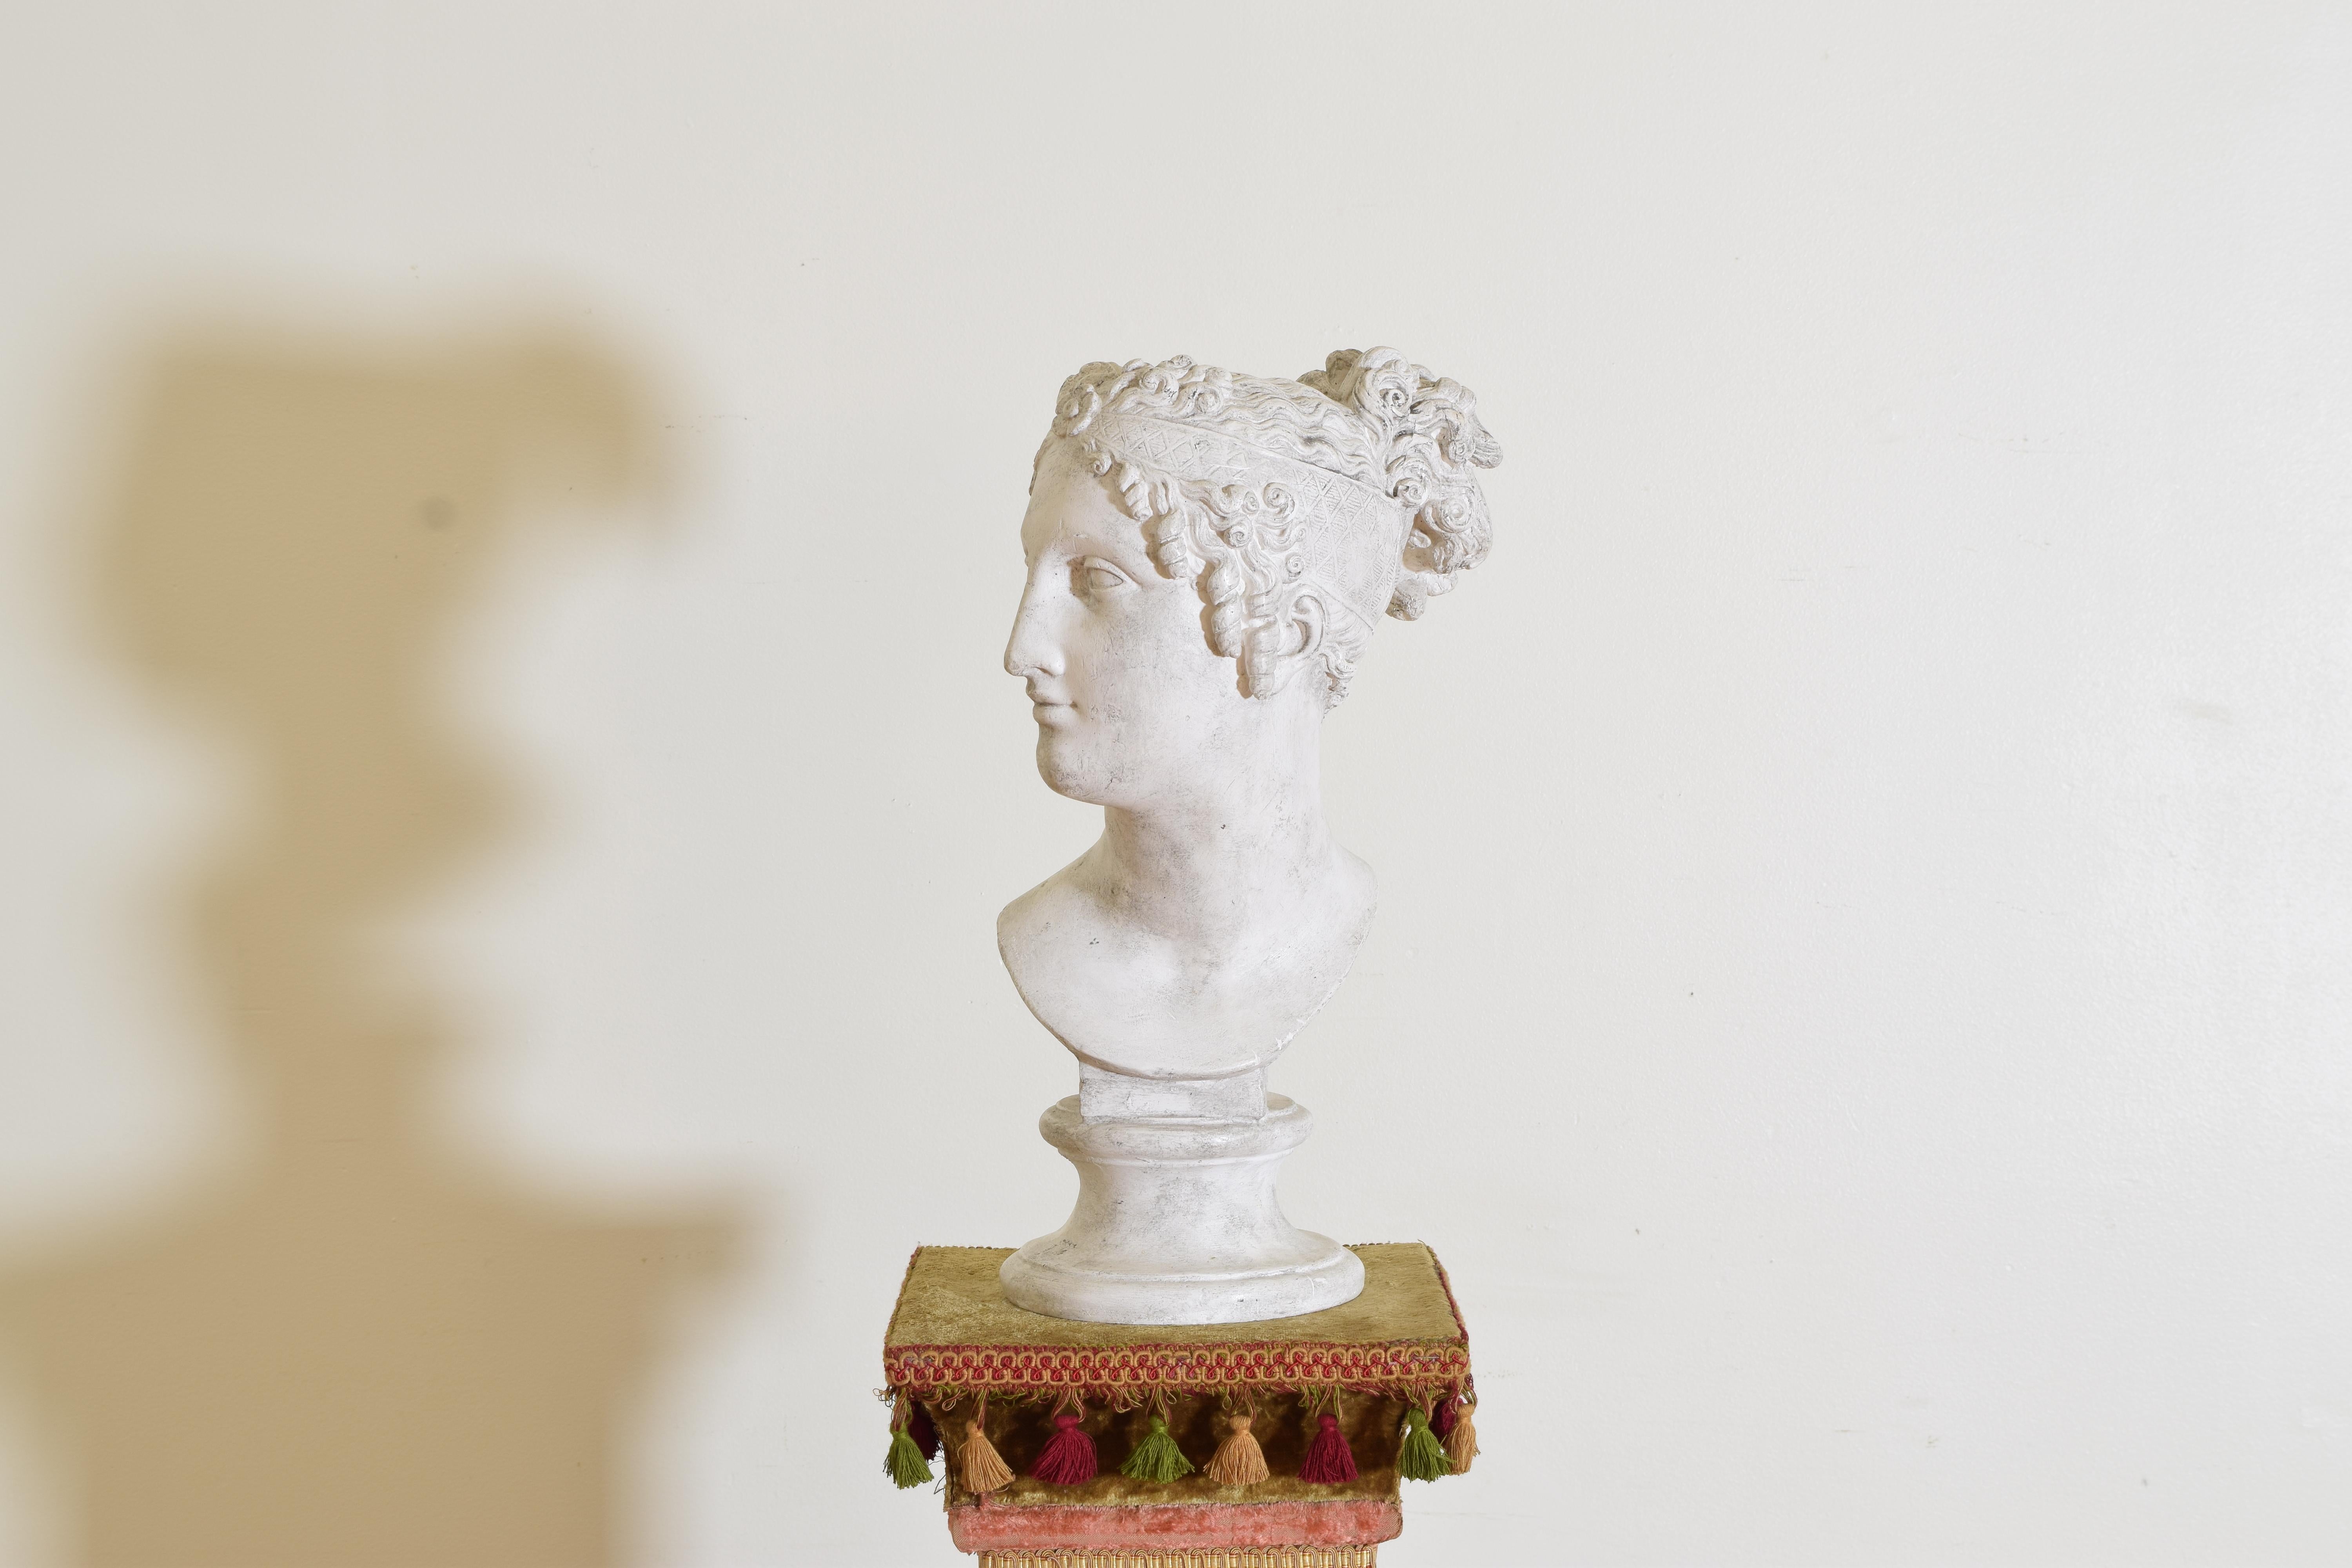 The plaster bust portrays Napoleon's sister, Pauline Bonaparte, as Venus Victorious. 
It was commissioned by her husband, Camillo Borghese, and originally sculpted in Rome from 1805 to 1808 which is on view at the Galleria Borghese in Rome. 